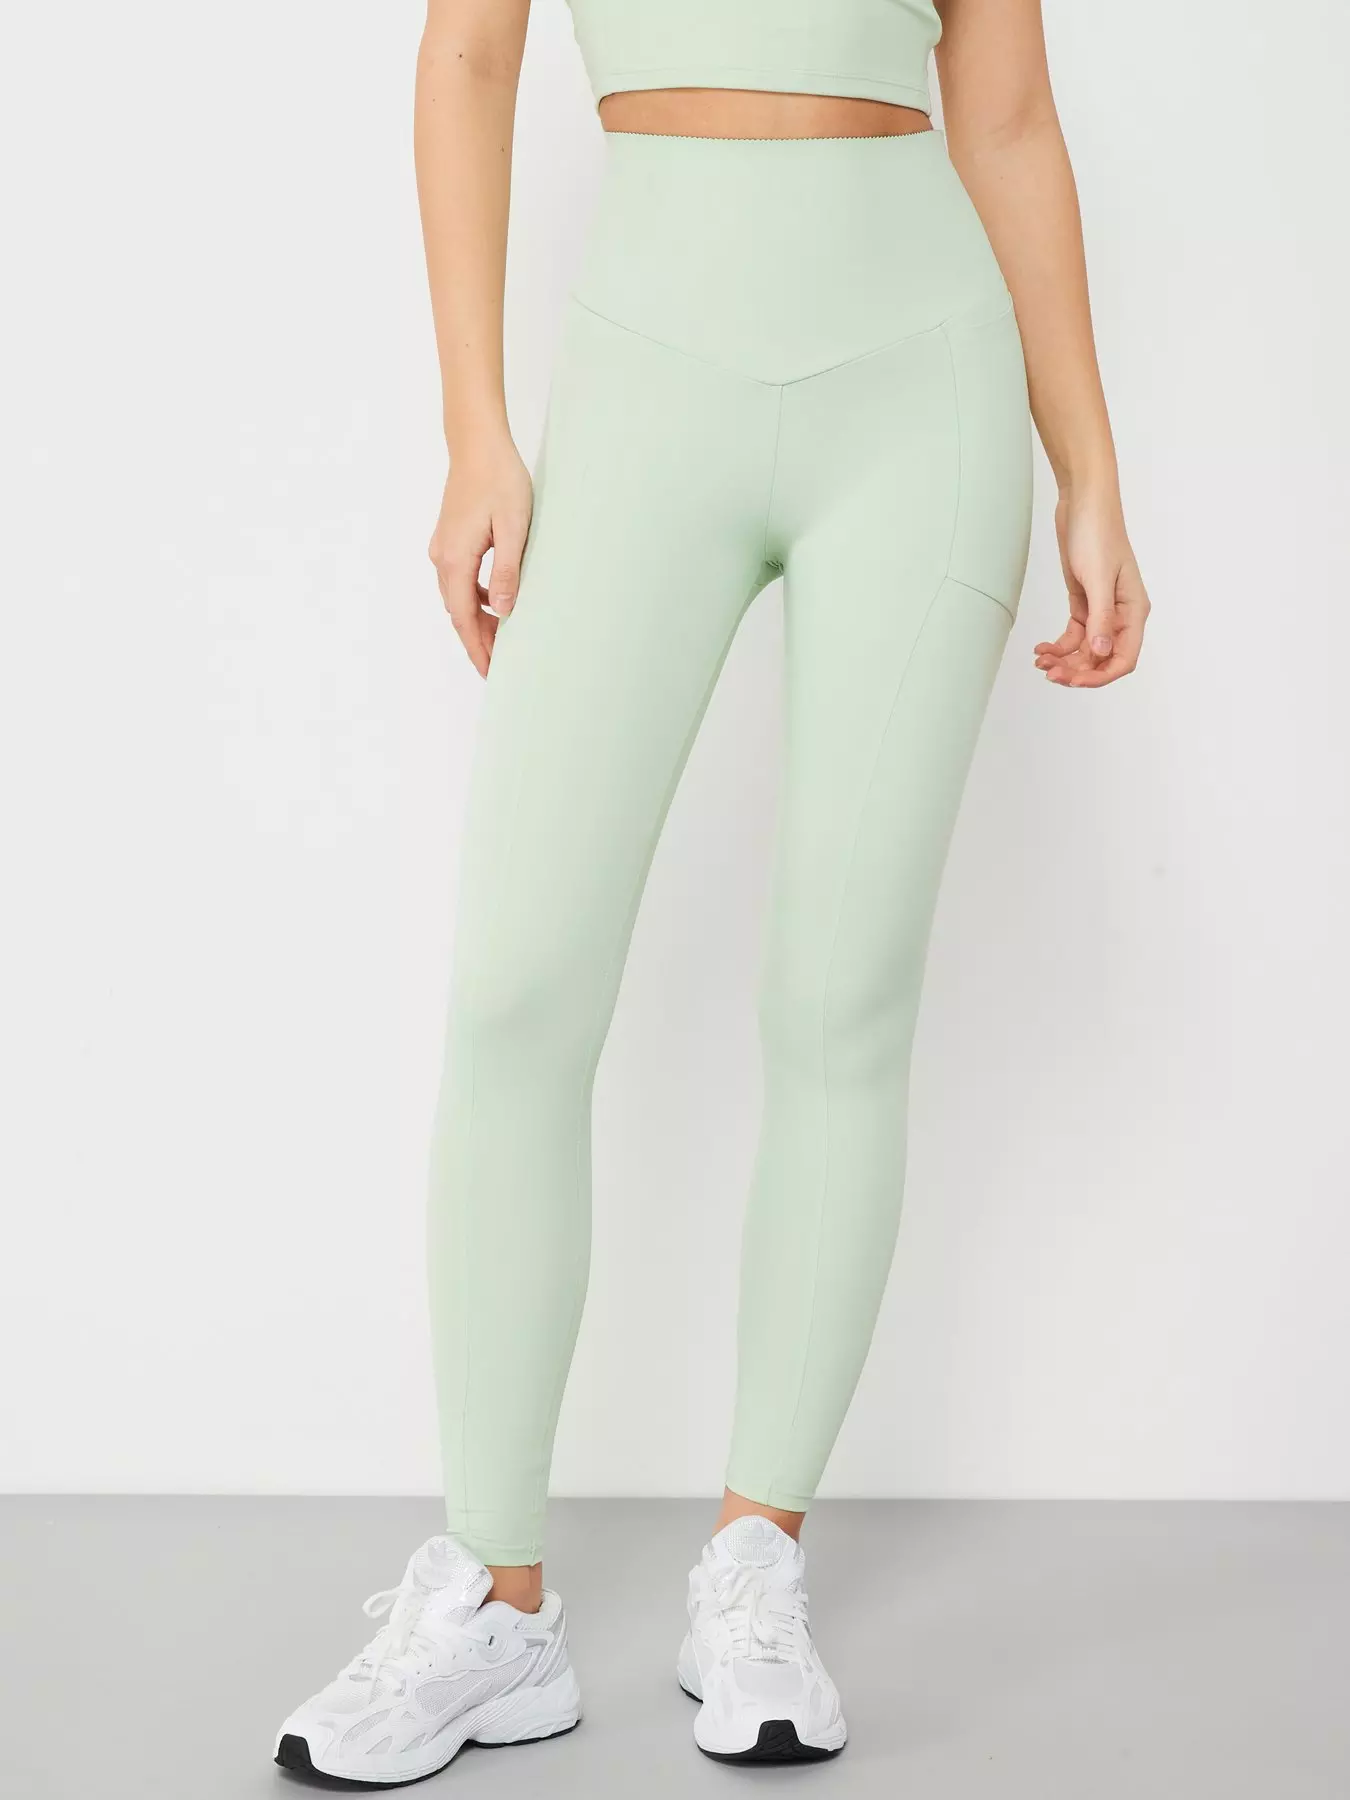 Lovable Taupe Brown Long Leggings – Shop the Mint